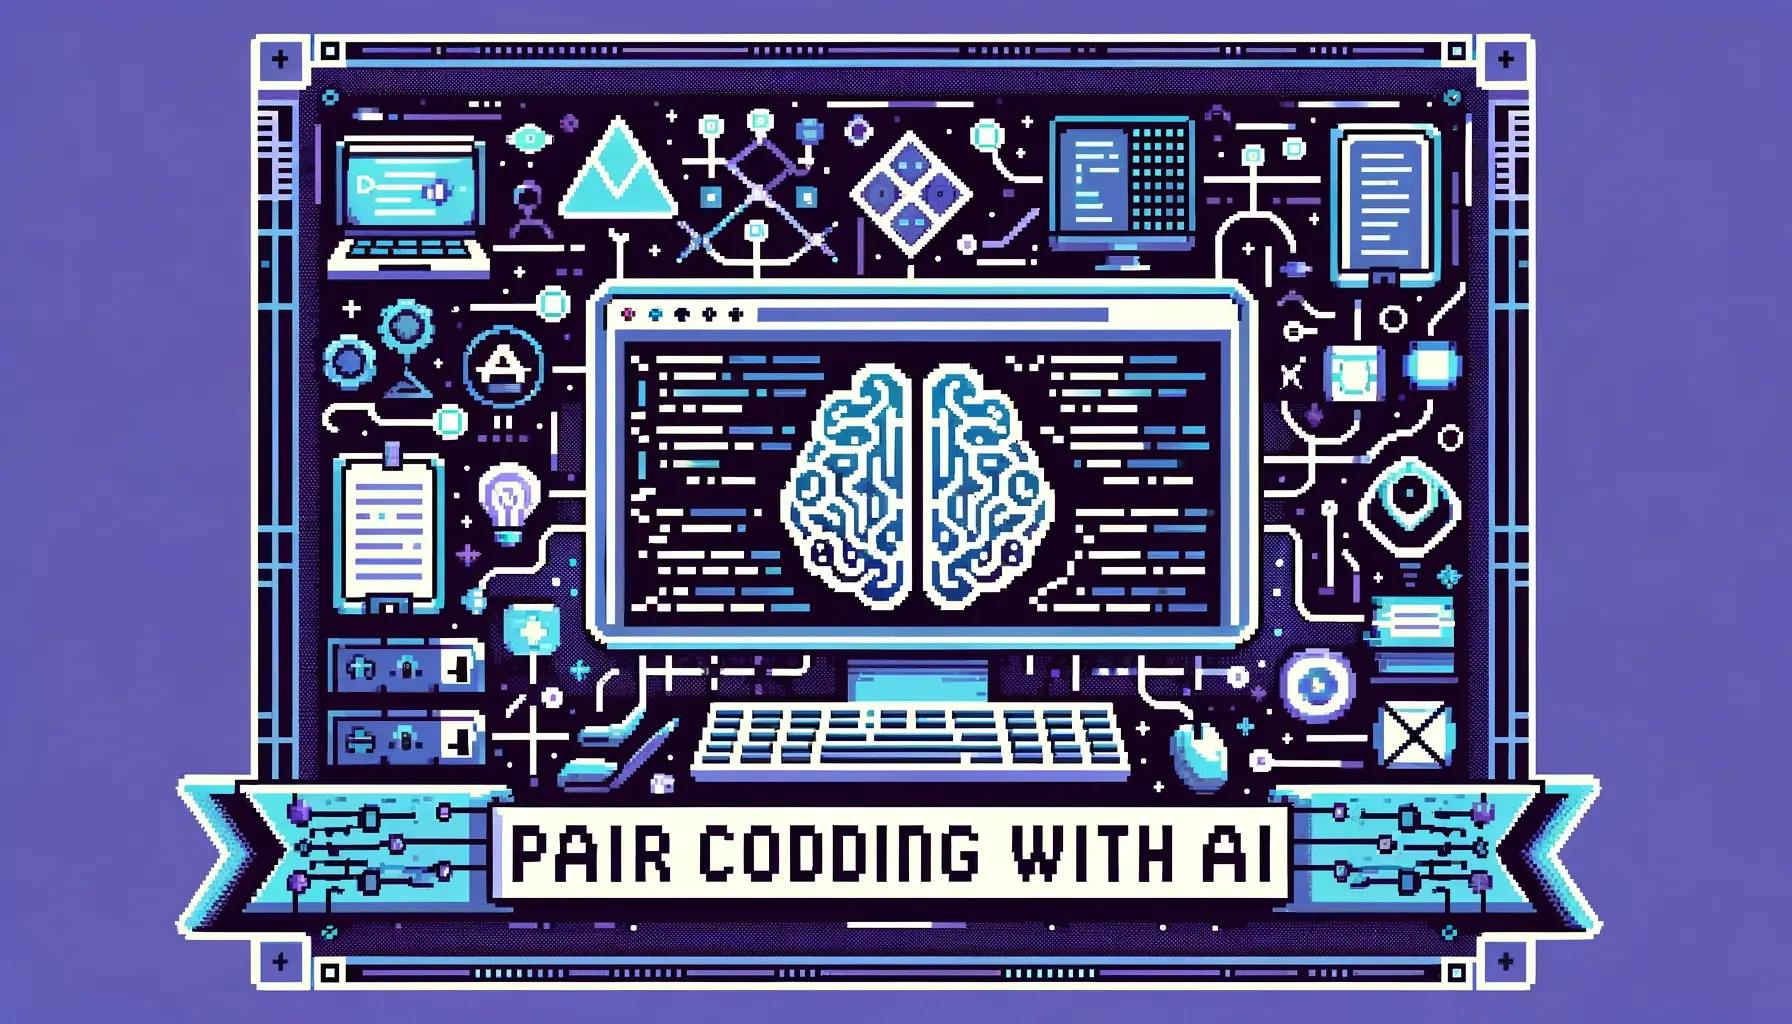 Pair coding with AI